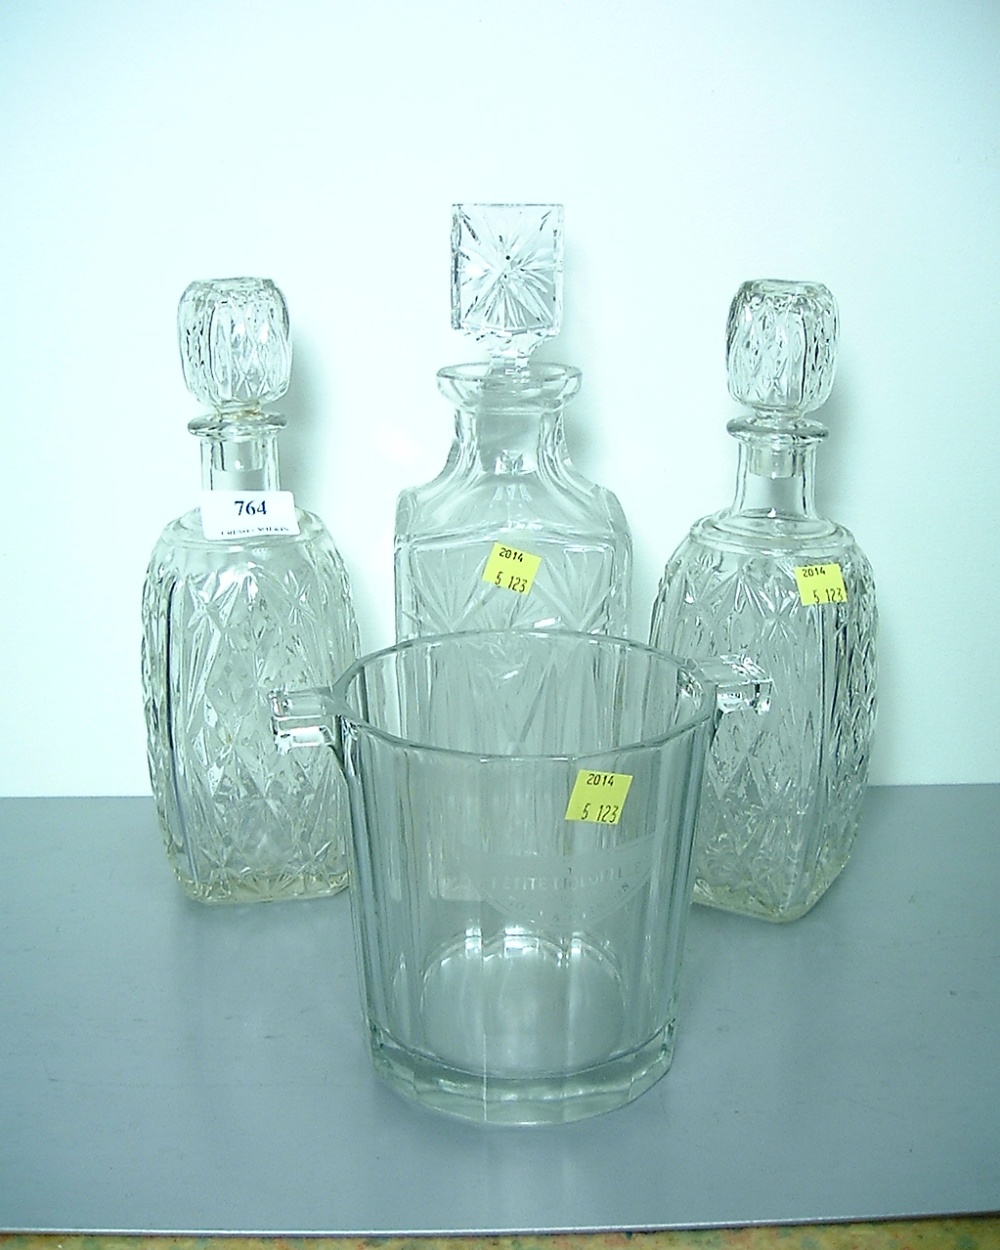 THREE GLASS DECANTERS AND GLASS JUG